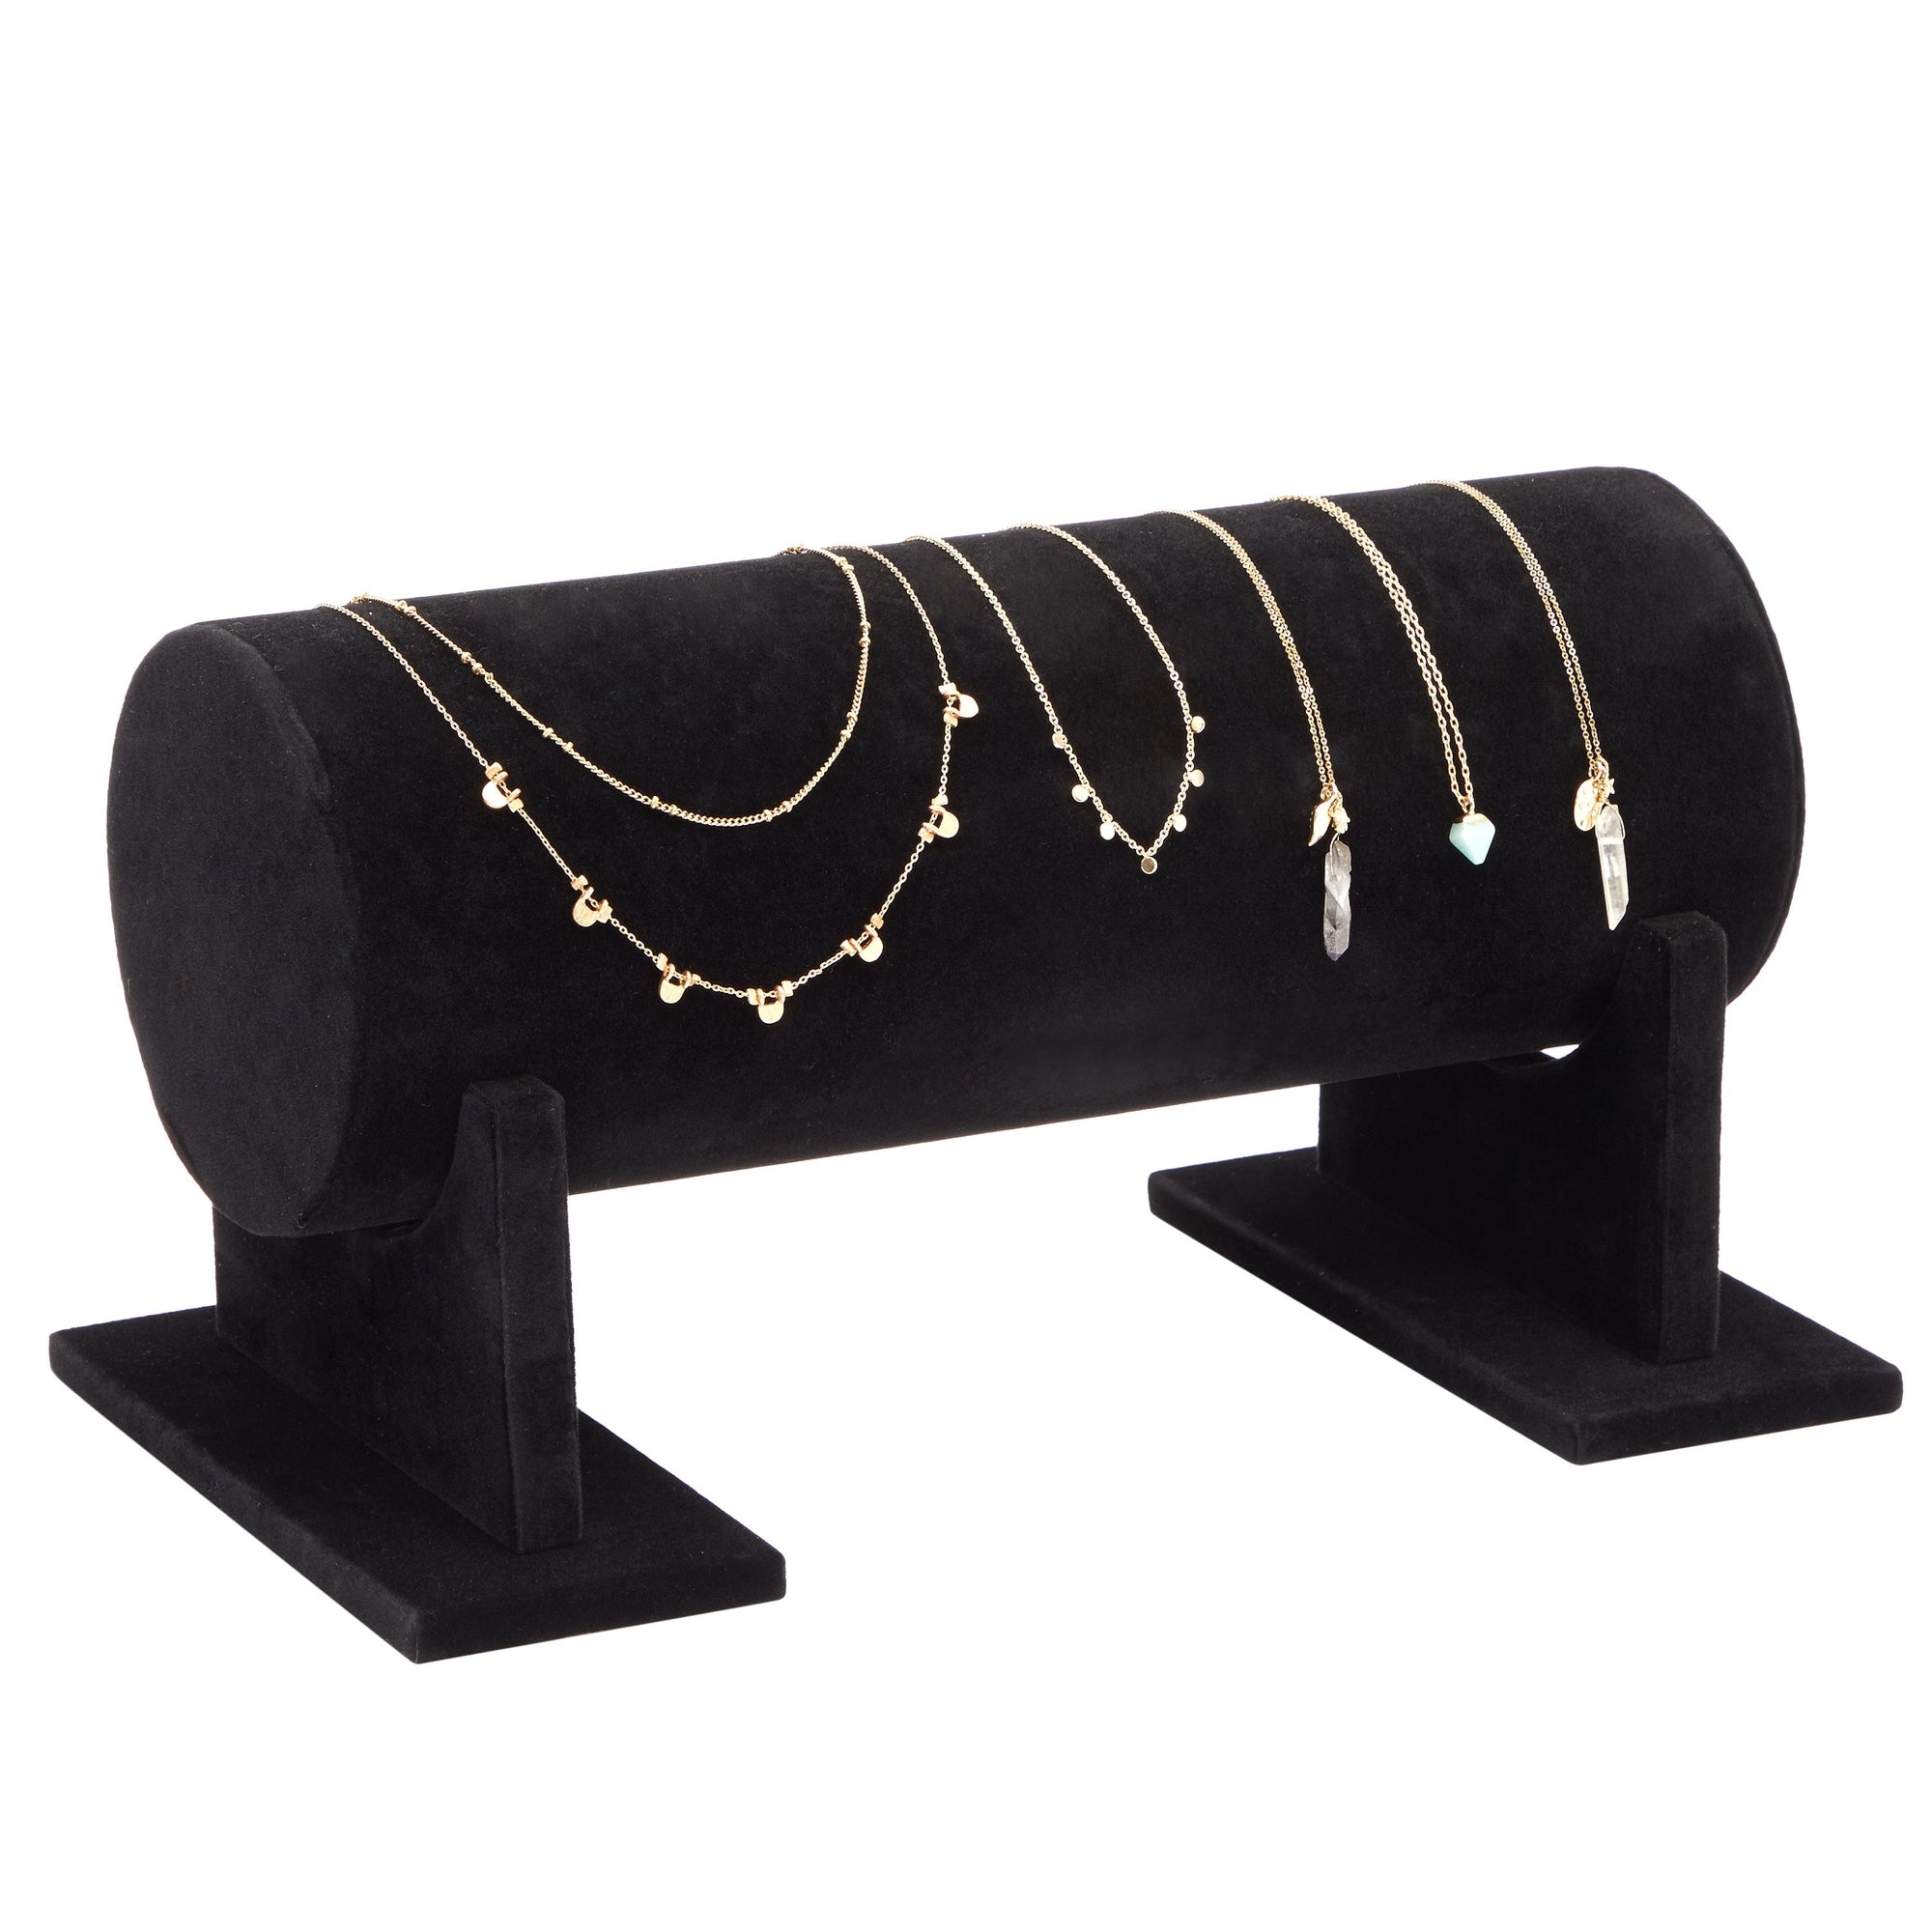 Juvale Velvet Jewelry Display Stand Holder for Bracelets & Bangles Black 3 Tier 12 x 9 x 7 Inches